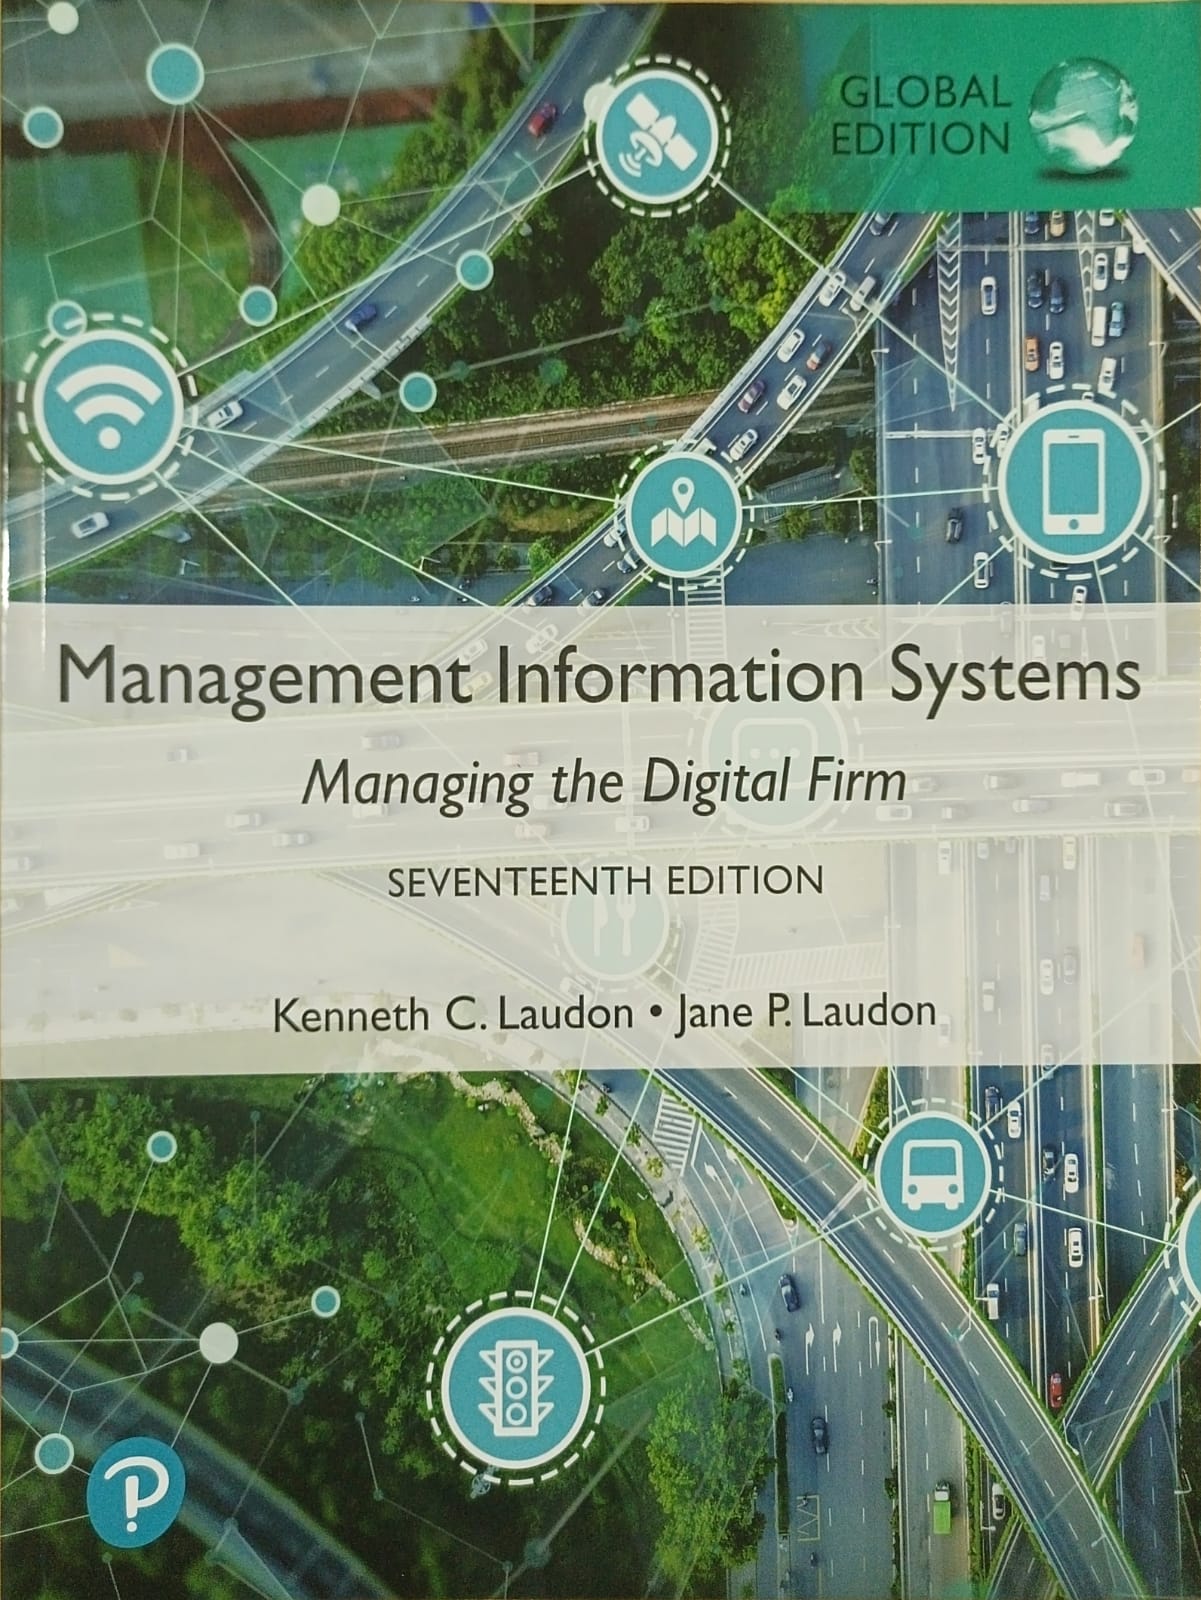 Management information systems: managing the digital firm 17th edition